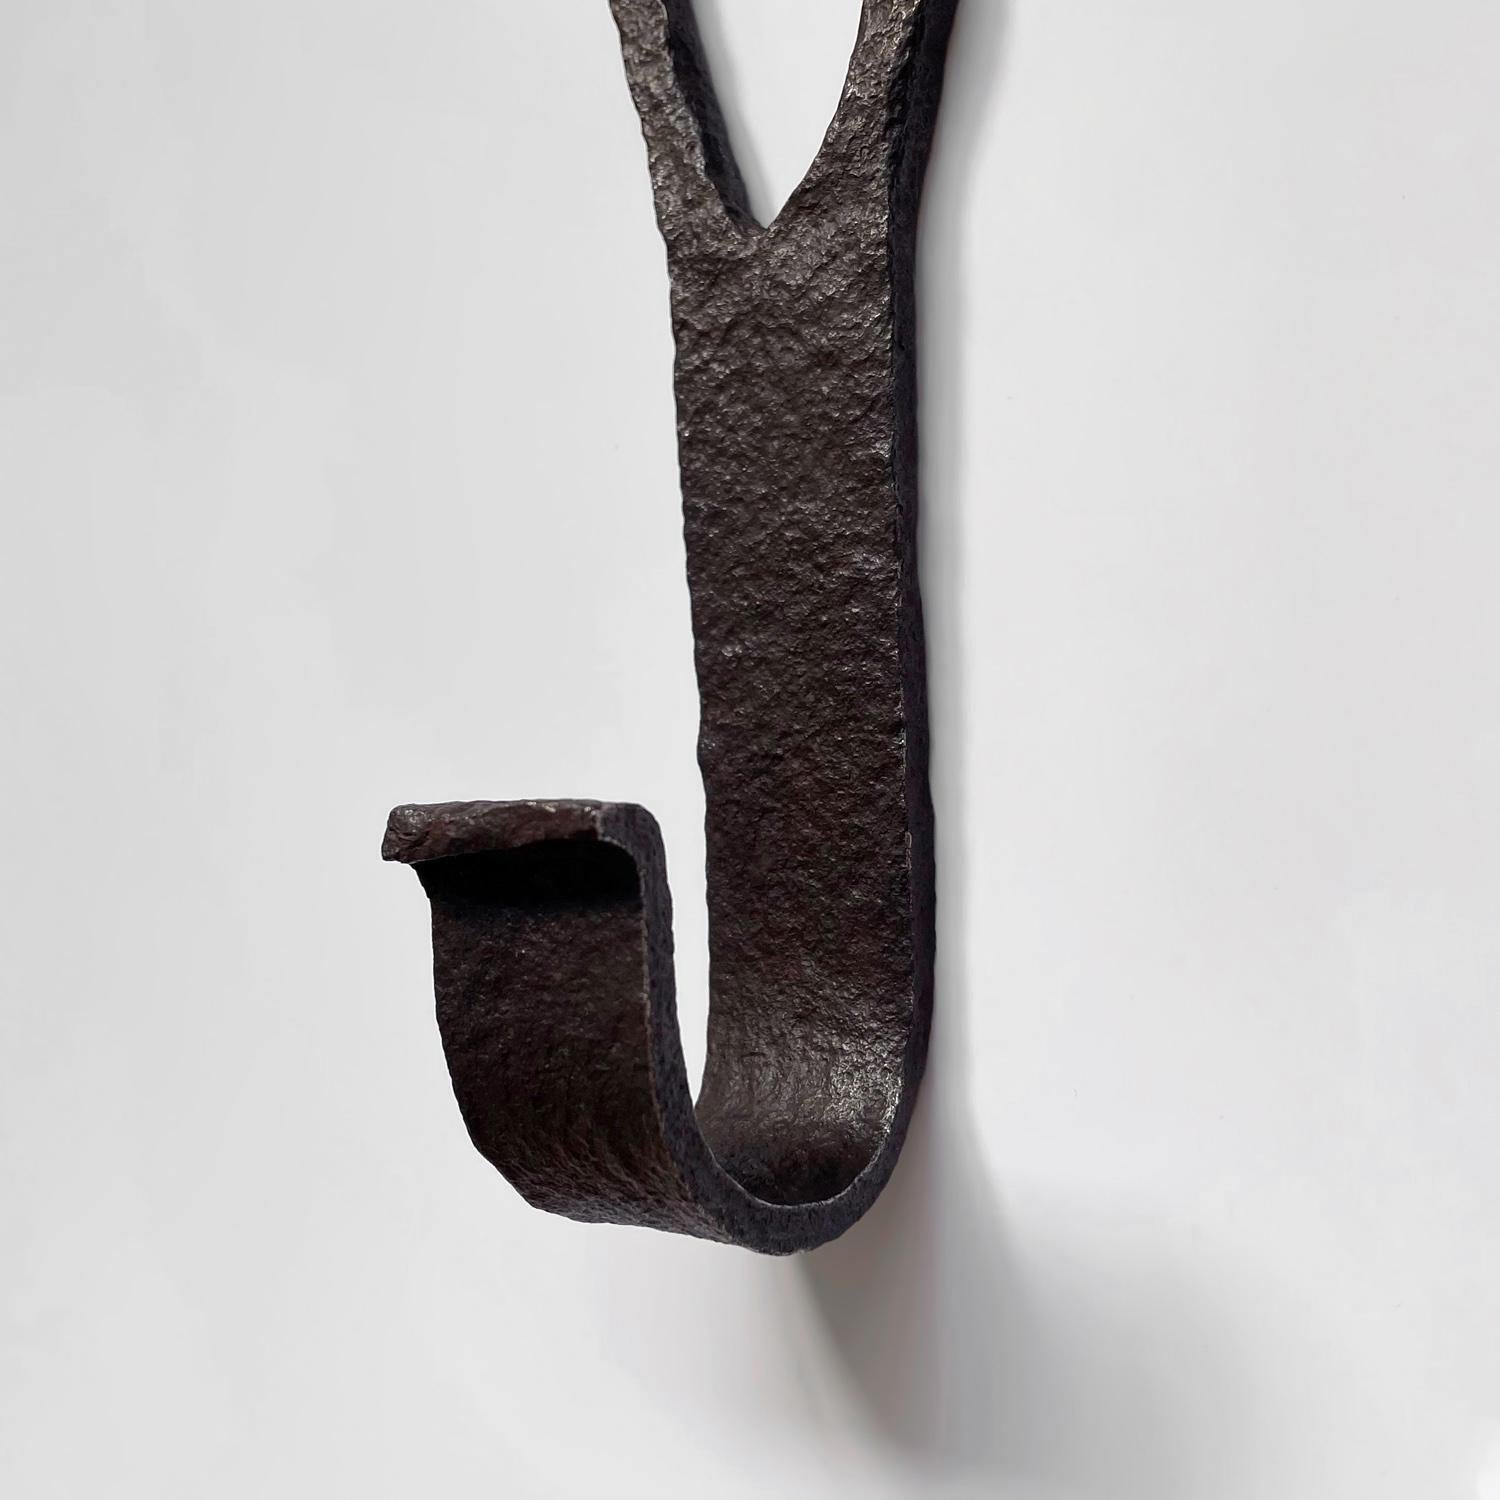 20th Century French Rustic Textured Iron Wall Hook For Sale